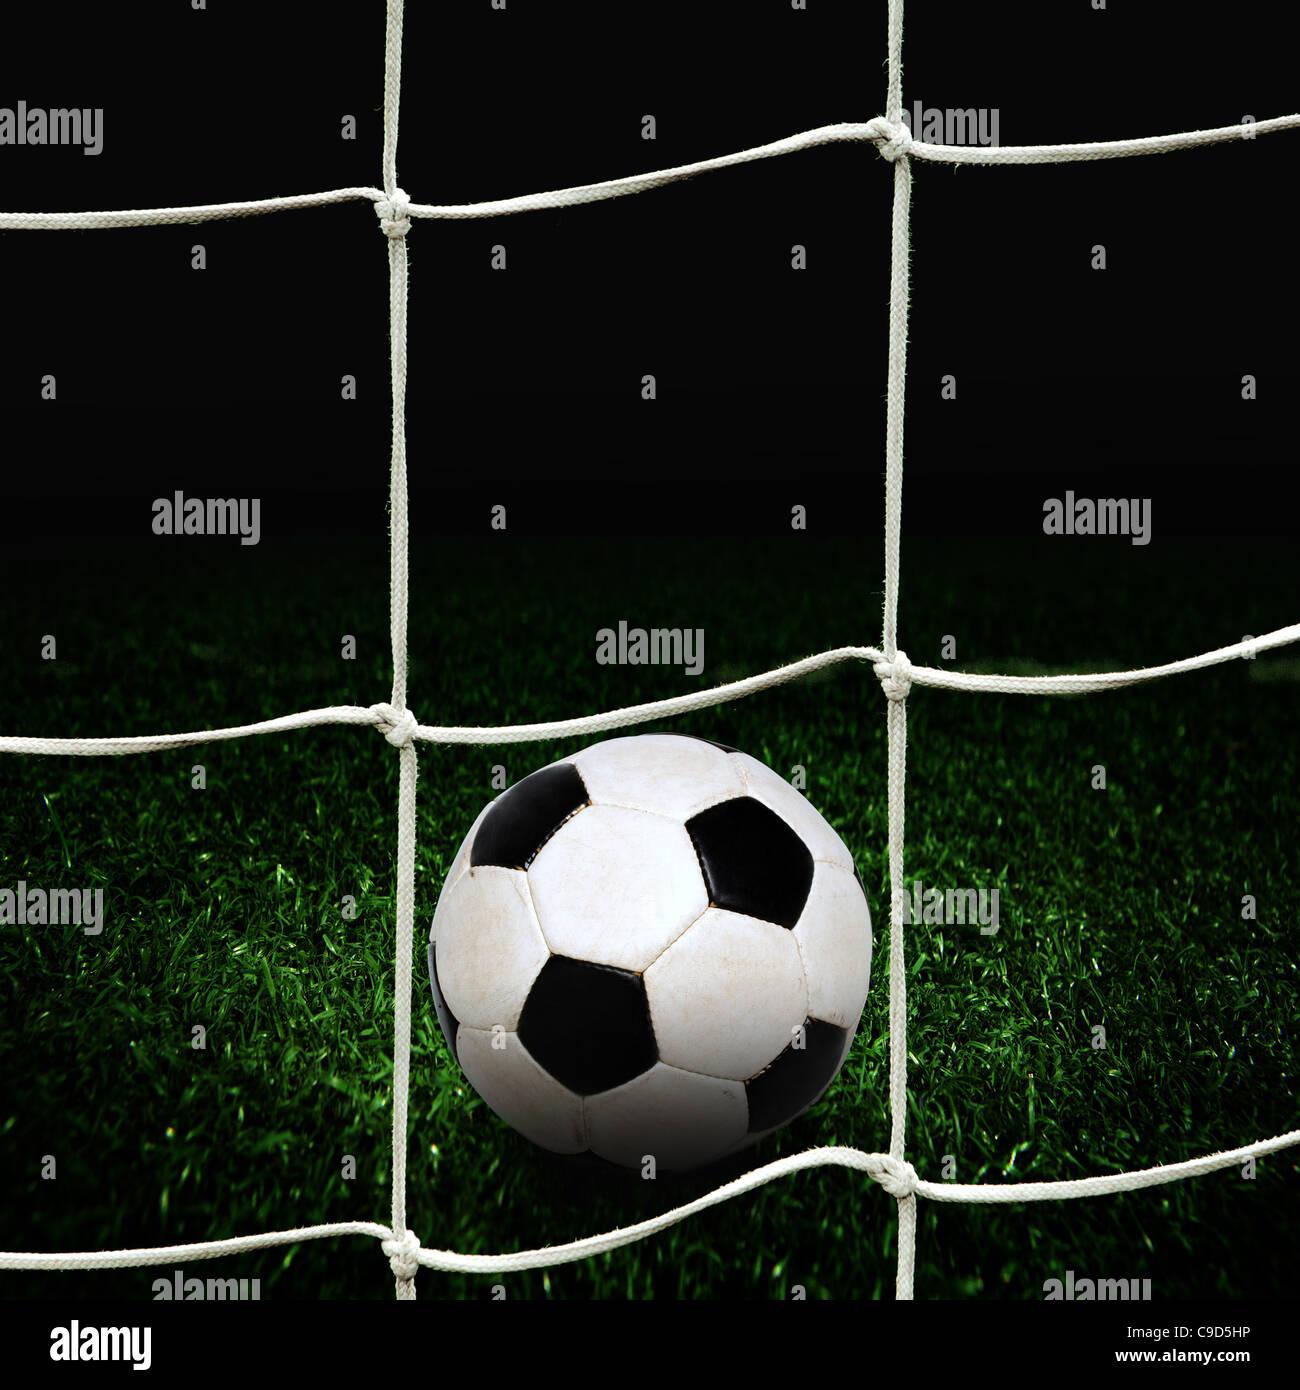 Soccer ball on the field of stadium with light Stock Photo